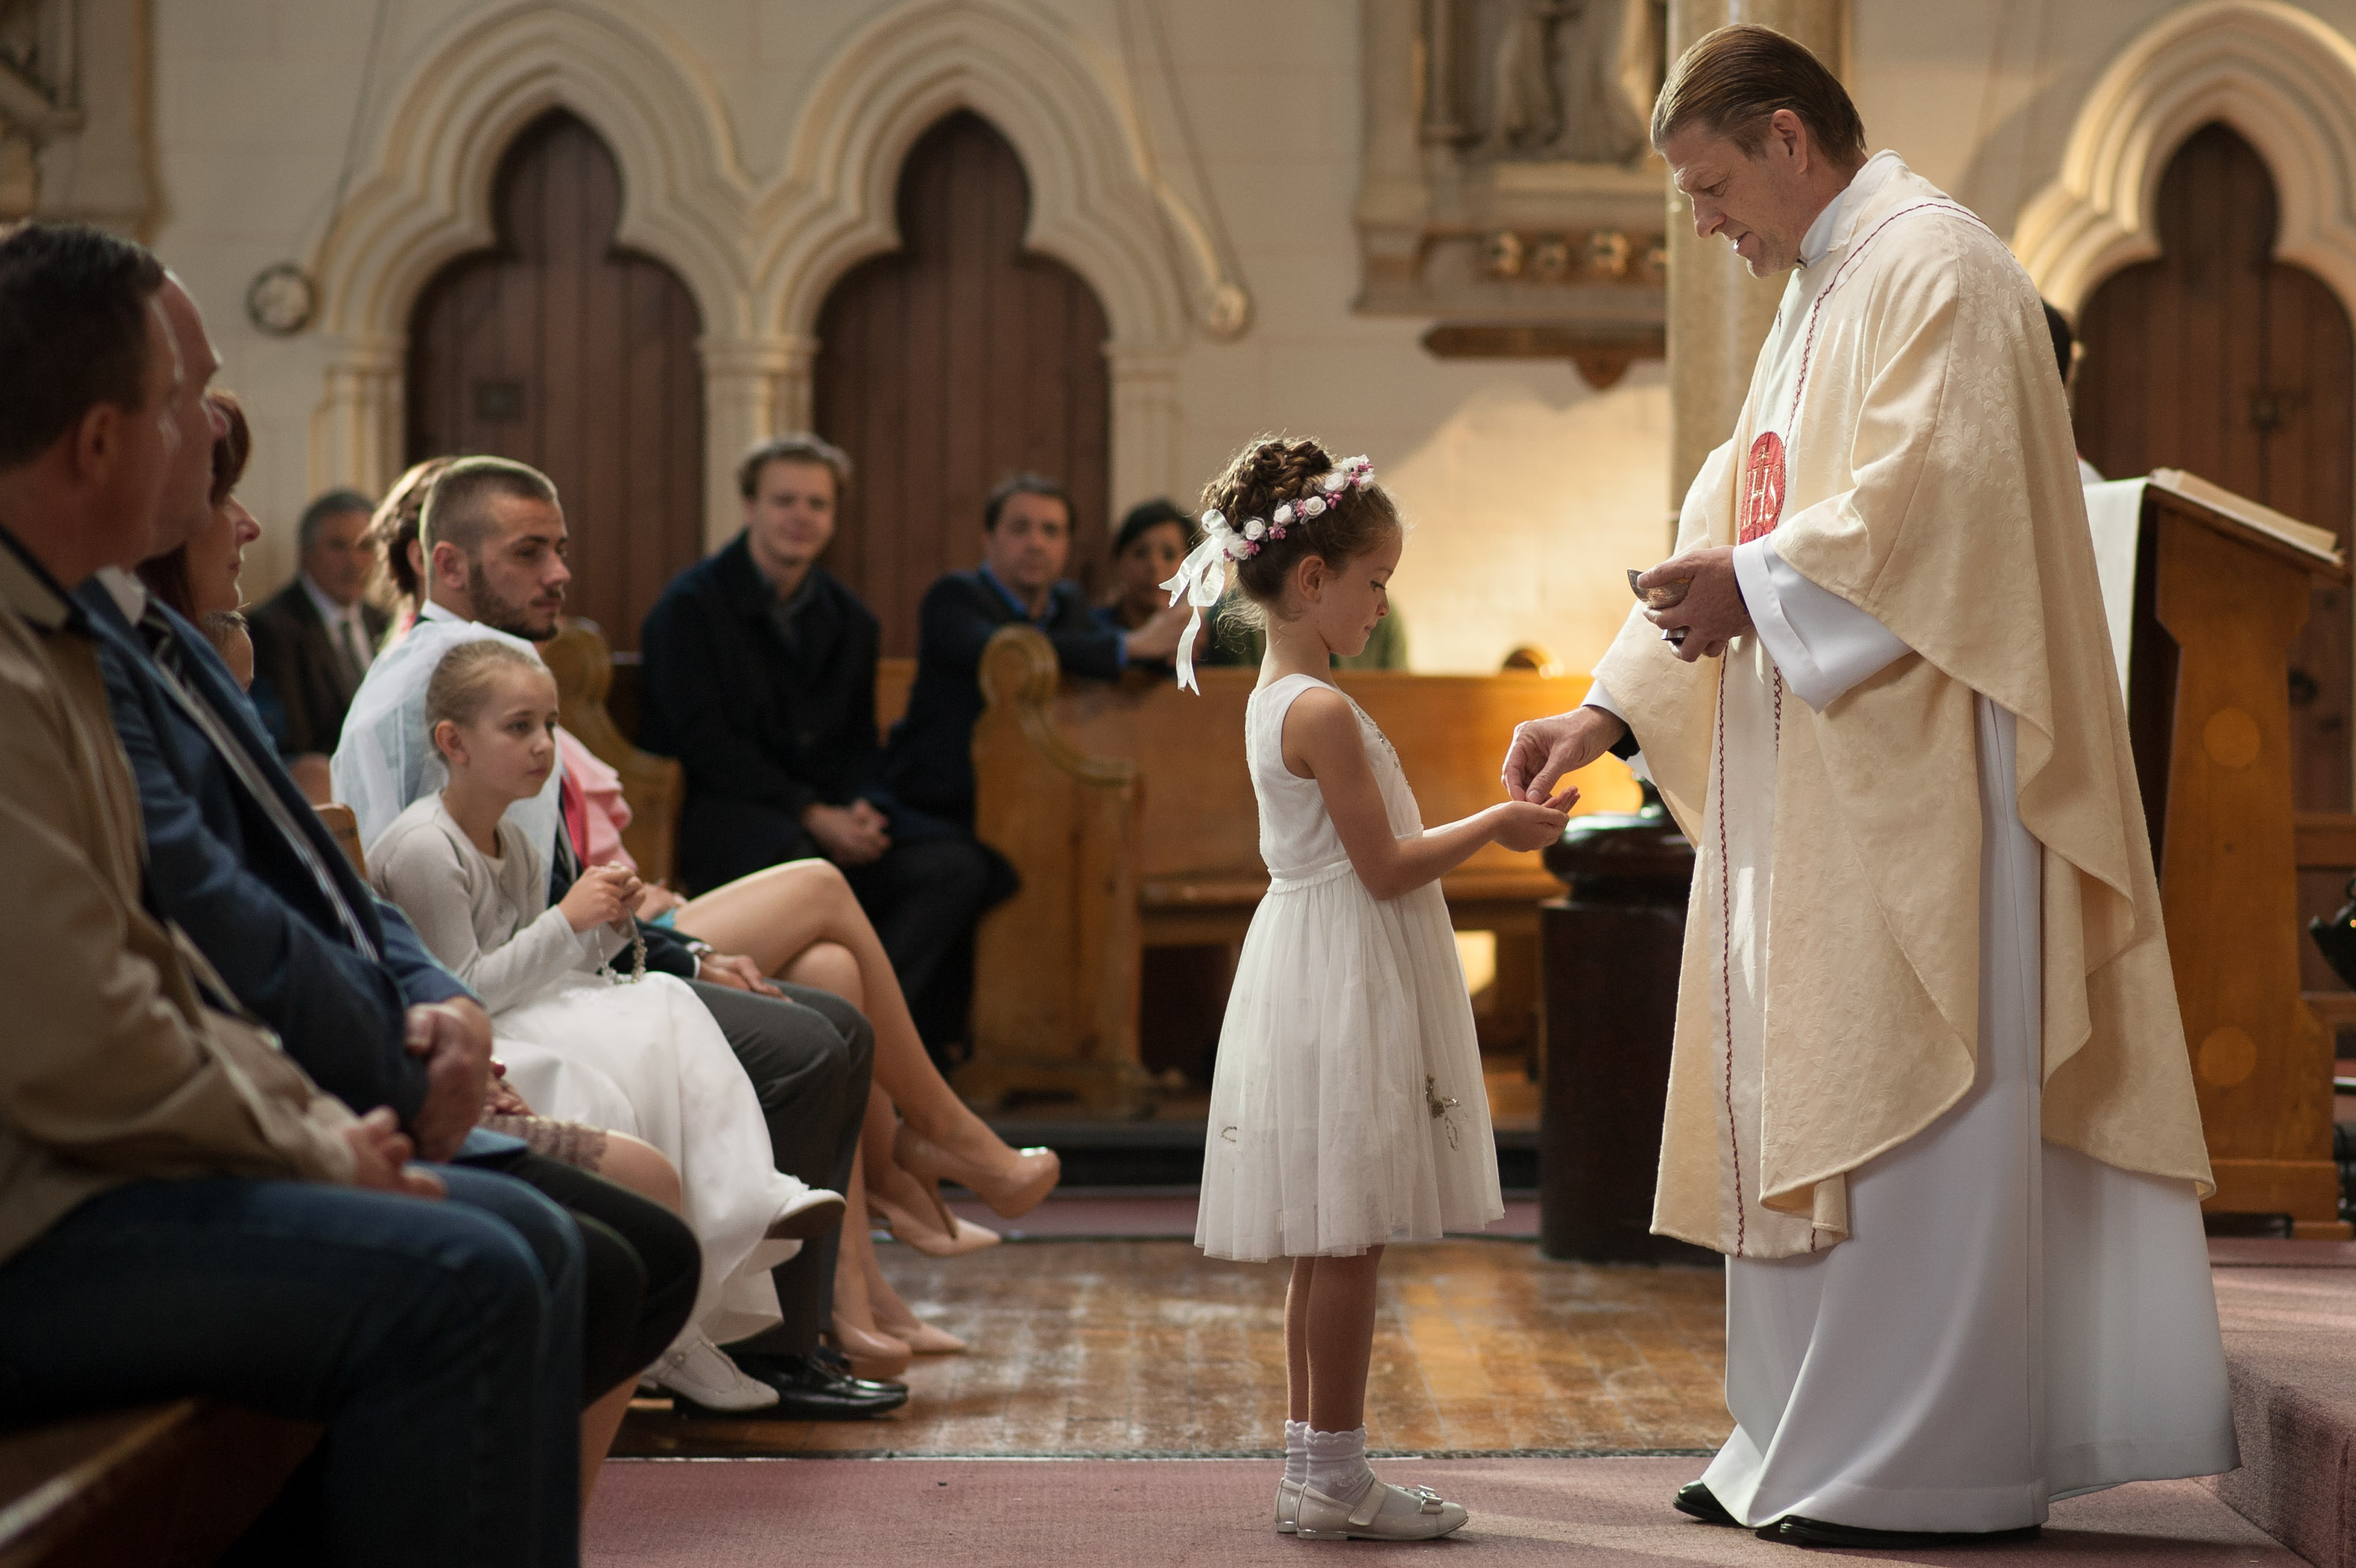 The First Communion Mass involved over 200 extras, including 40 children.